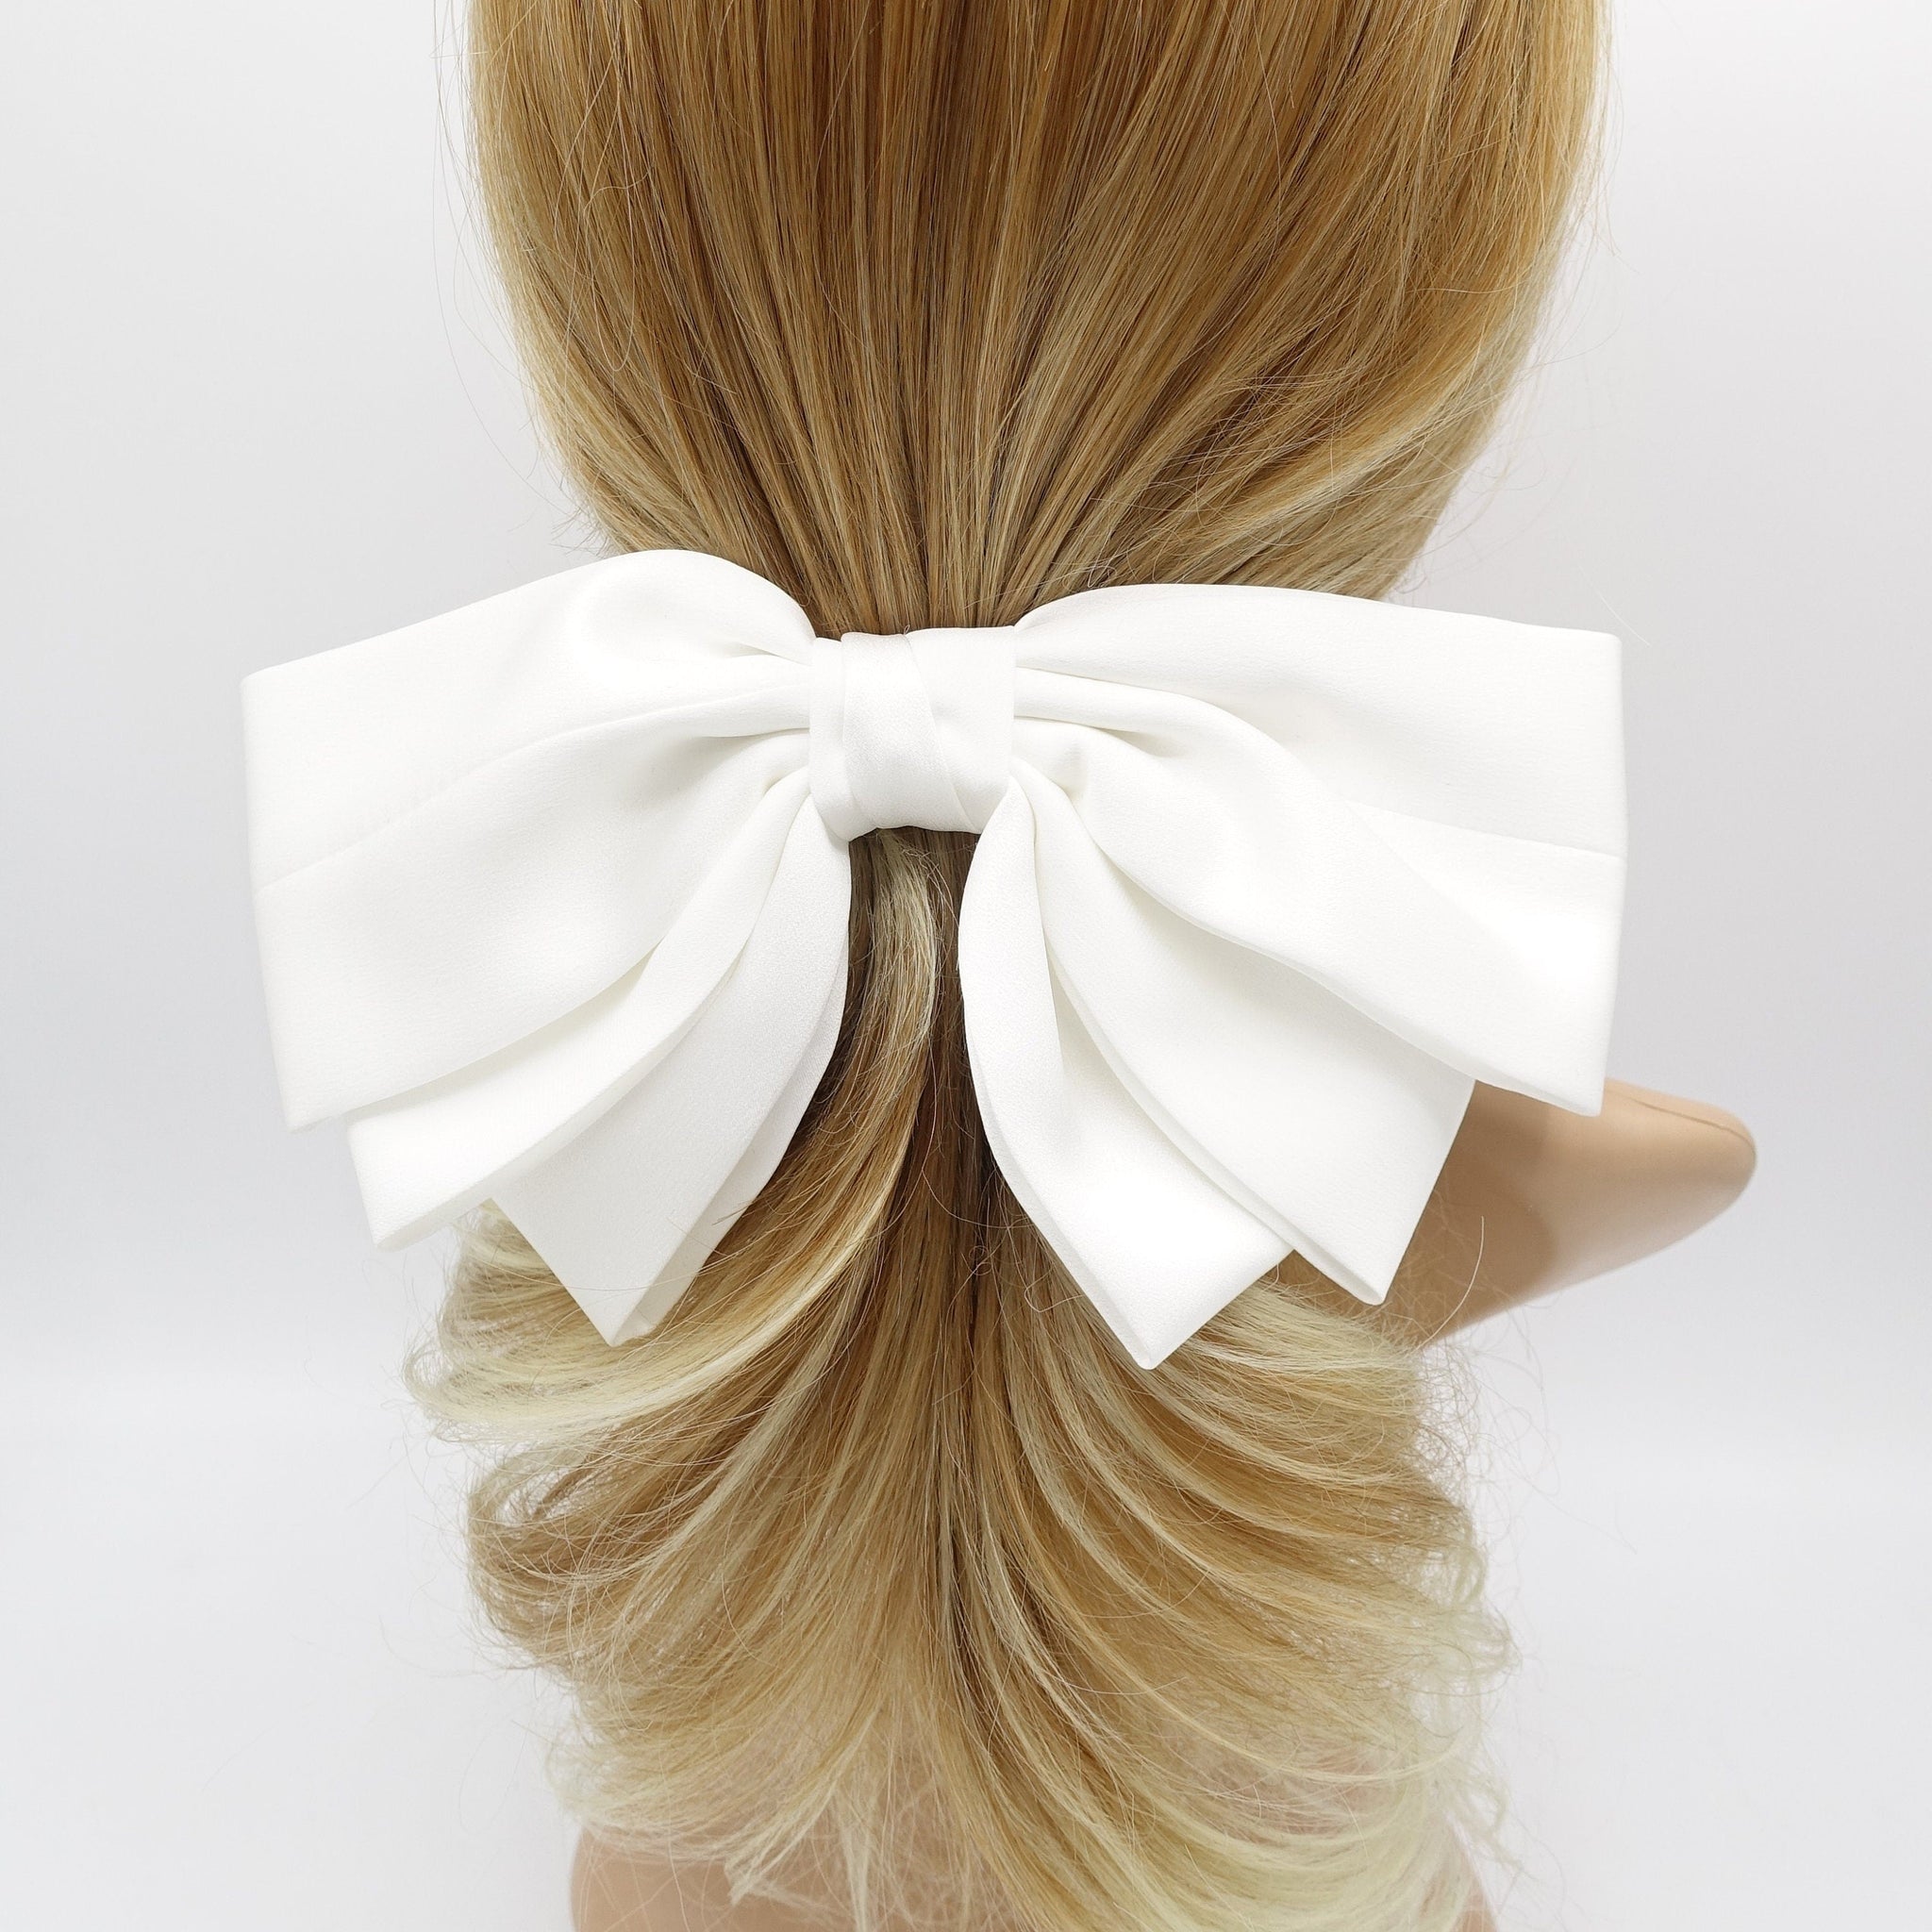 veryshine.com Barrette (Bow) White satin hair bow 2 tone double layered hair accessory for women